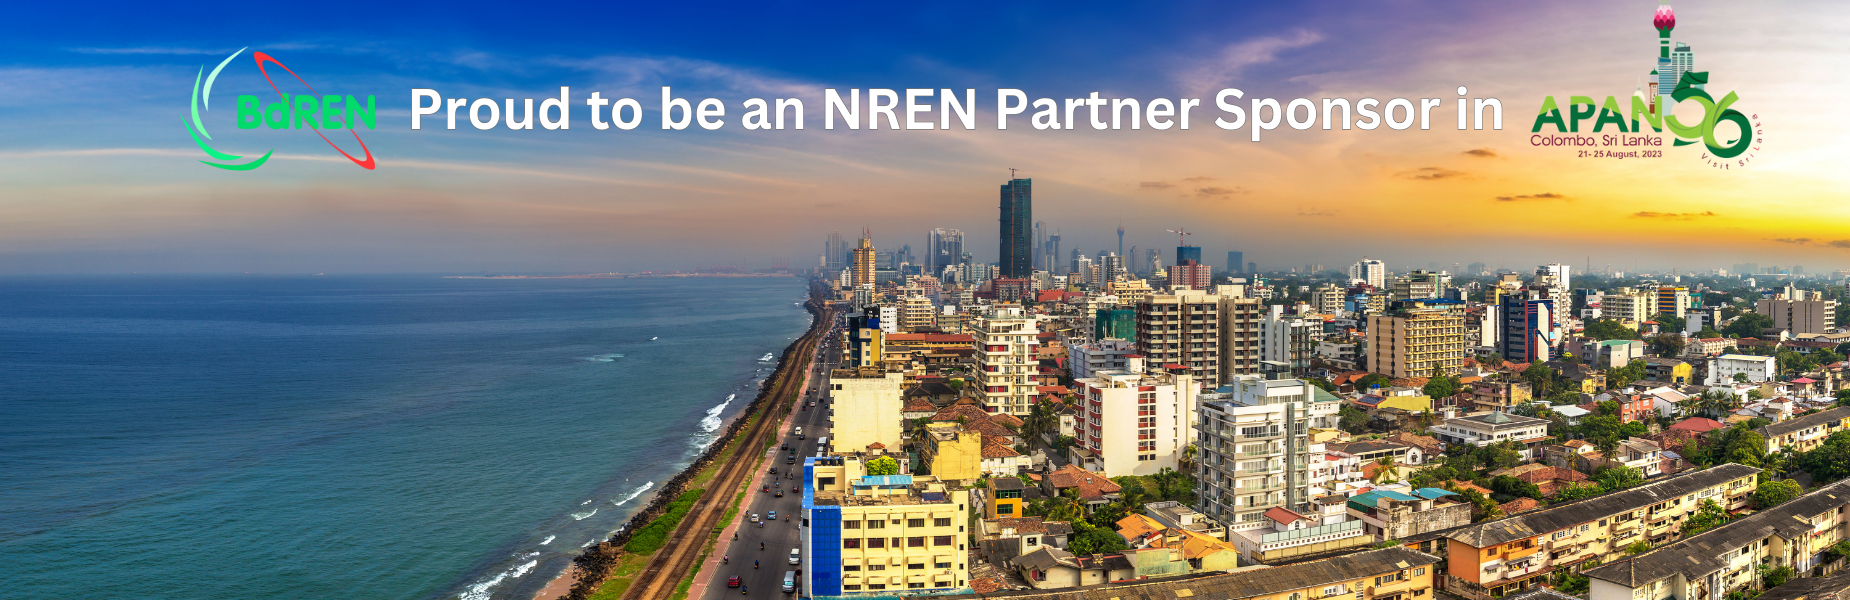 BdREN to Sponsor APAN56 in Colombo, Sri Lanka: A Significant Step Towards Collaborative Networking